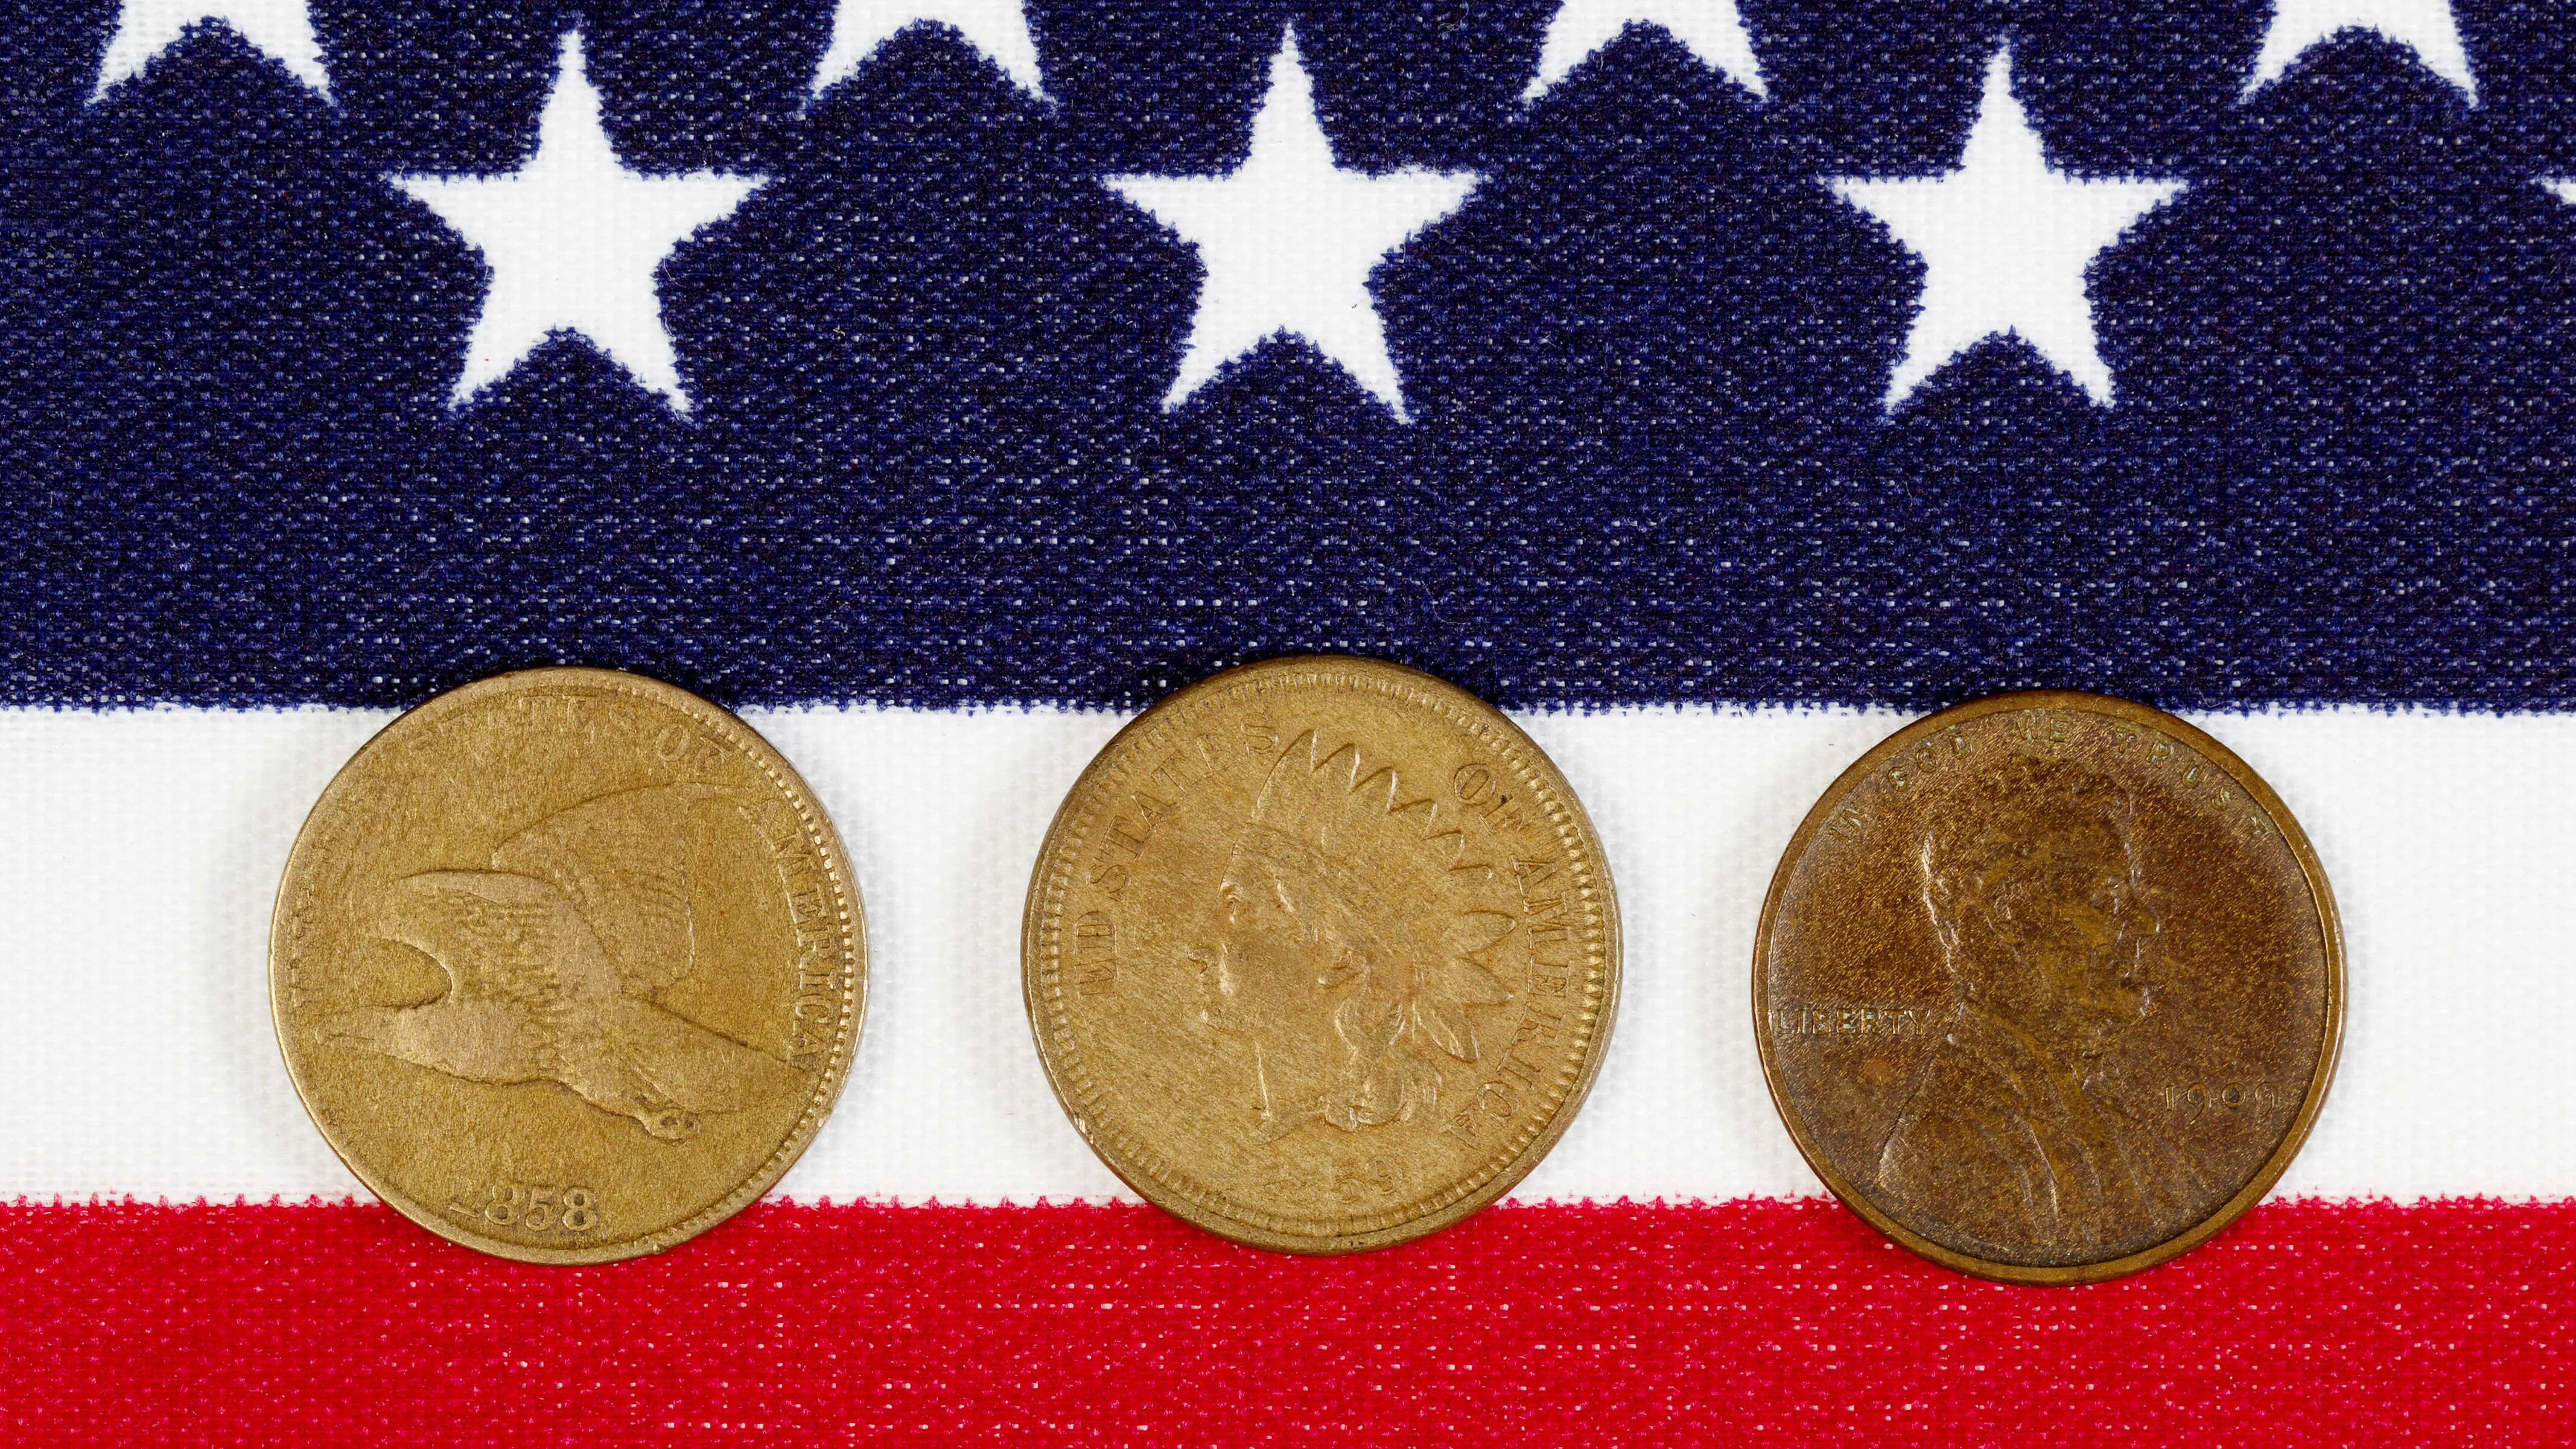 Closeup view of United States One Cent Pieces, original start dates, placed on American Flag.